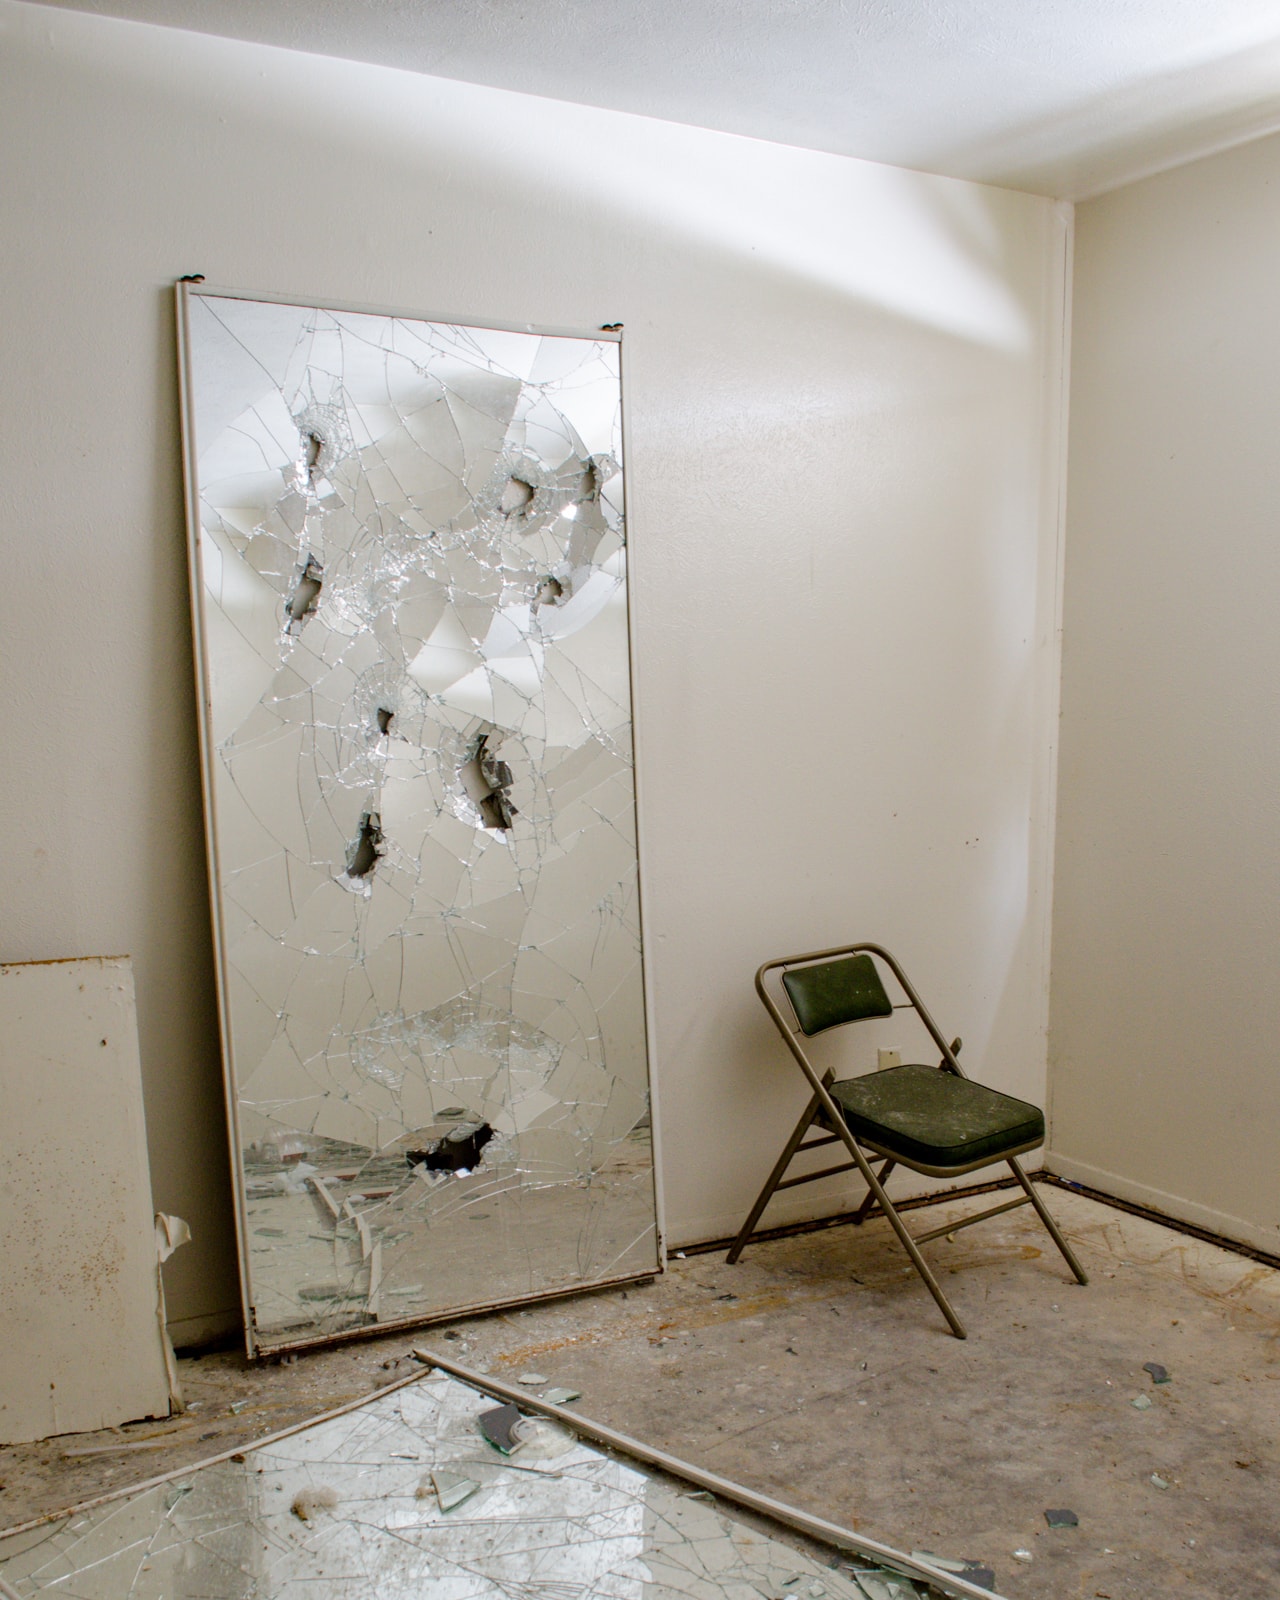 Broken mirrors in an abandoned apartment urbex